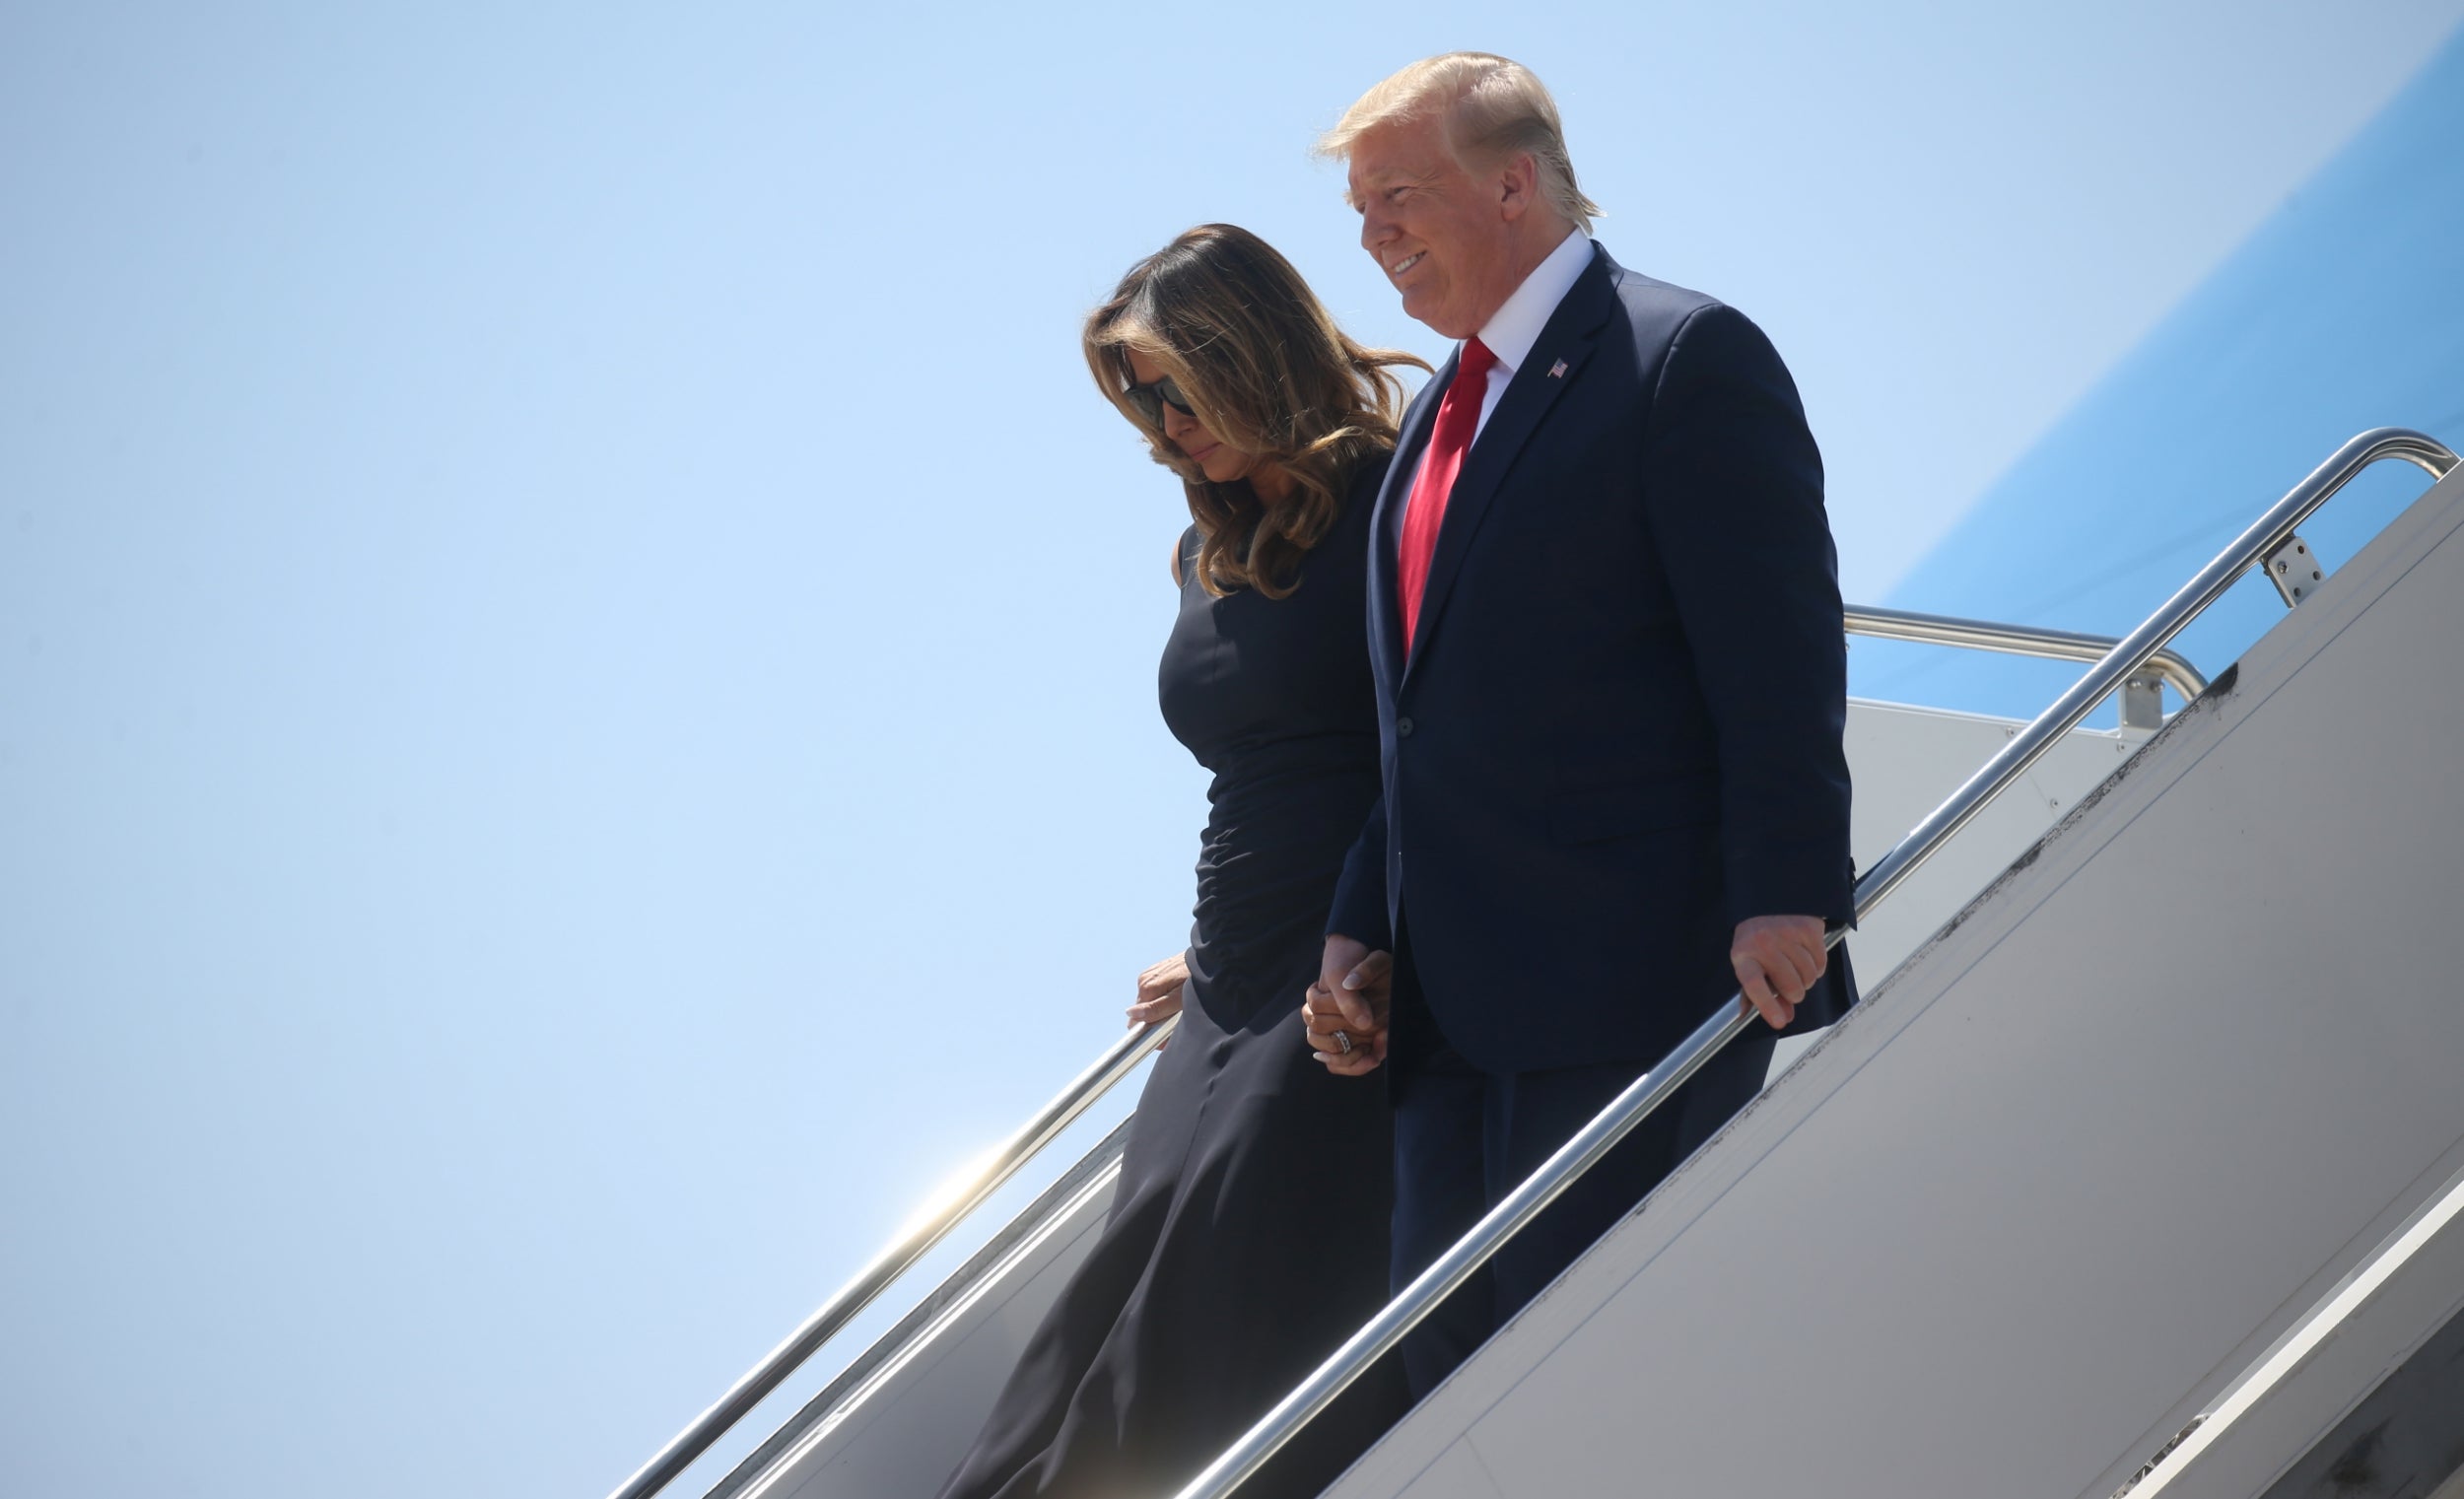 The first lady and the president arrive in El Paso (Reuters)